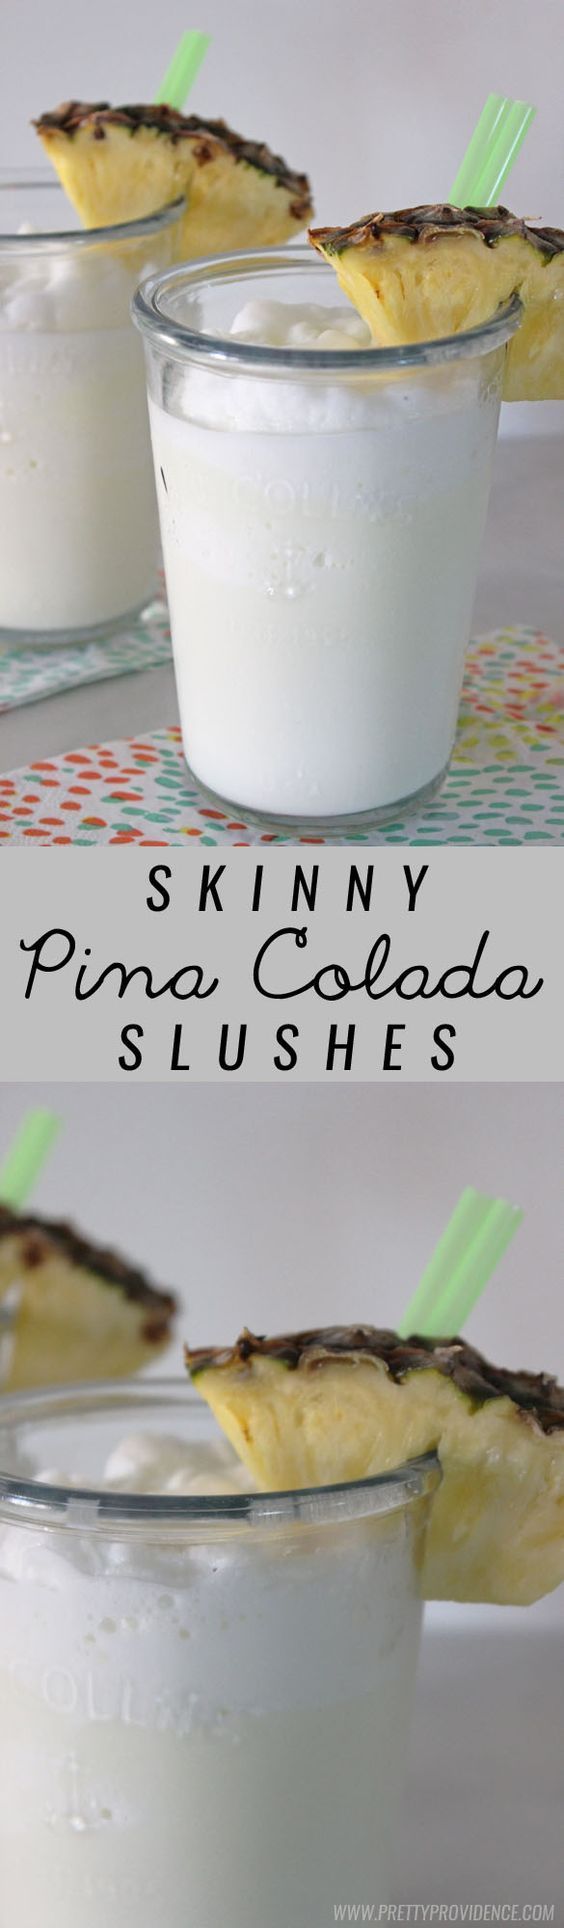 These skinny virgin pina colada slushes are amazing! A totally guilt free and refreshing summer drink!: